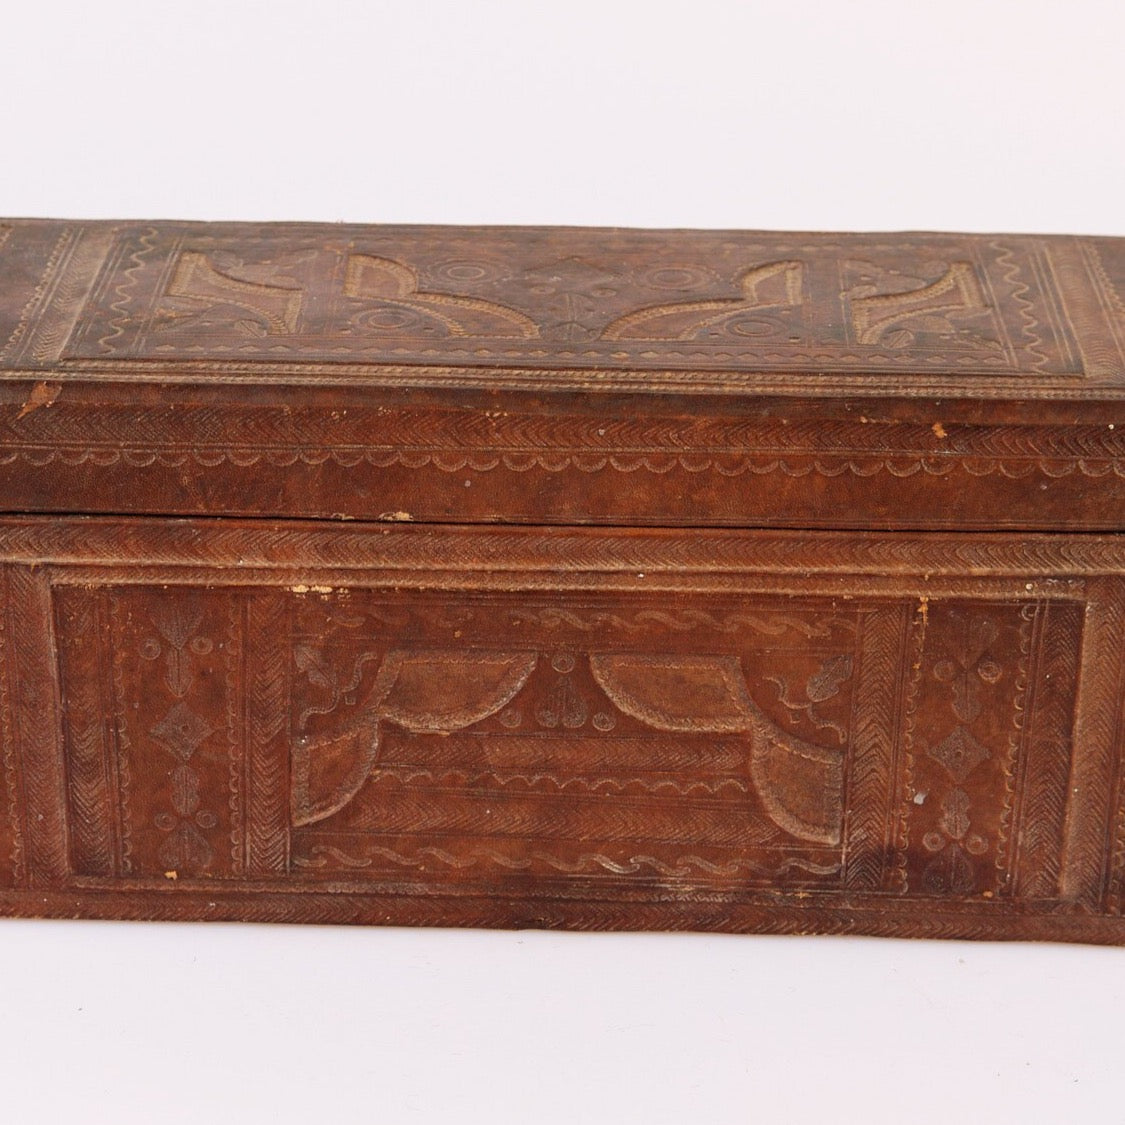 Carved Wooden Box with Leather Lining from North Africa